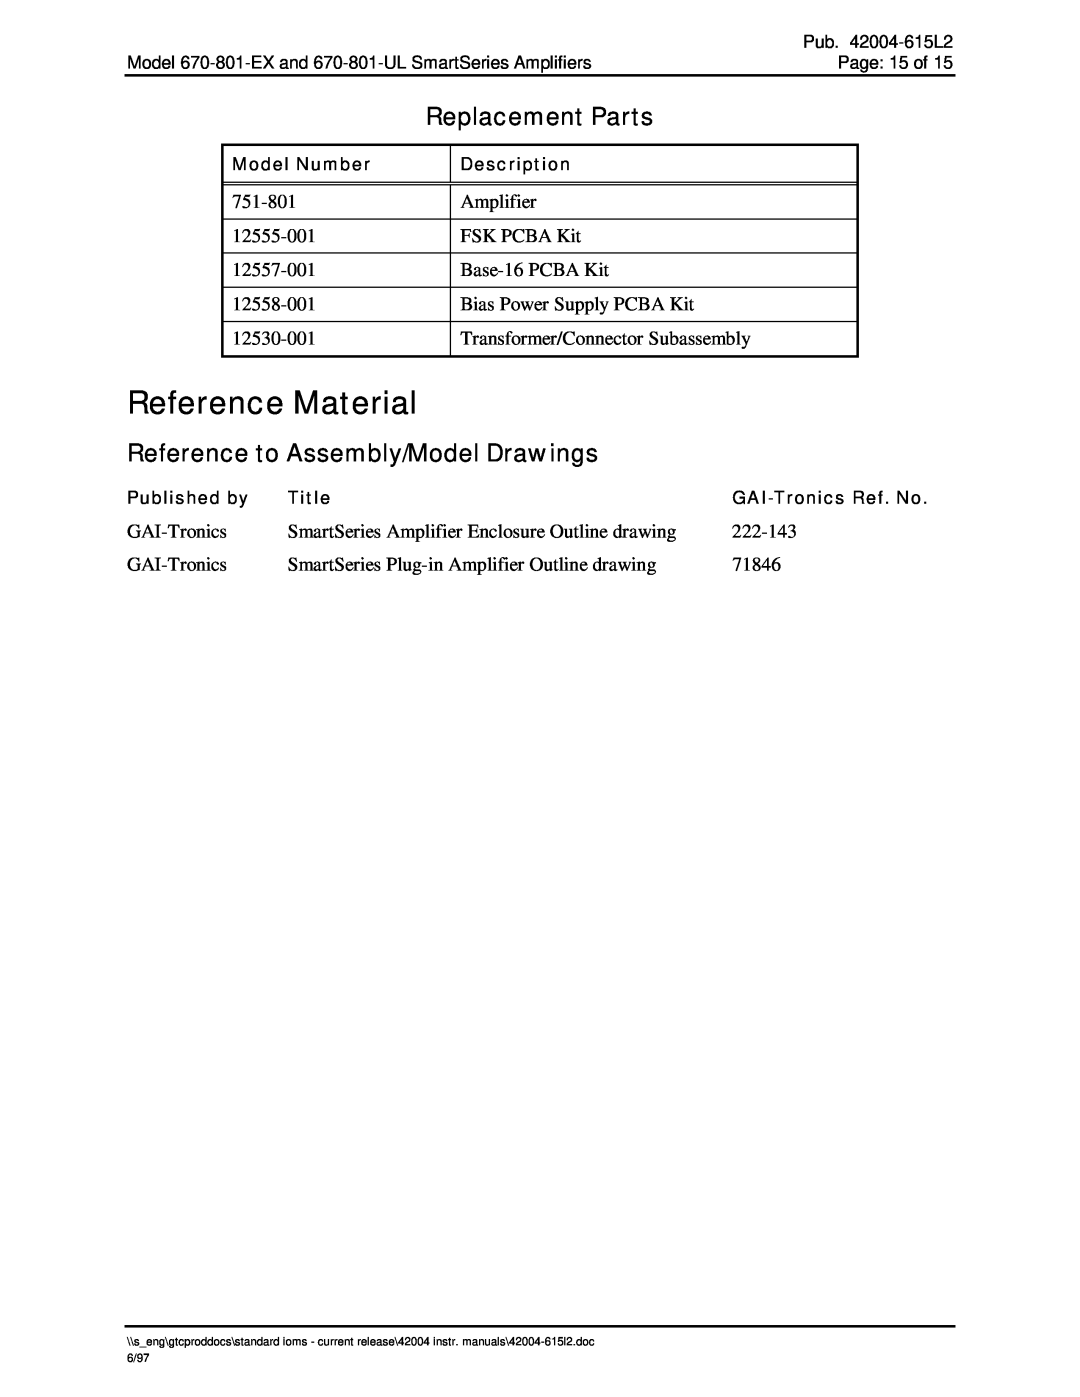 Hubbell 670-801-UL, 670-801-EX manual Reference Material, Replacement Parts, Reference to Assembly/Model Drawings 